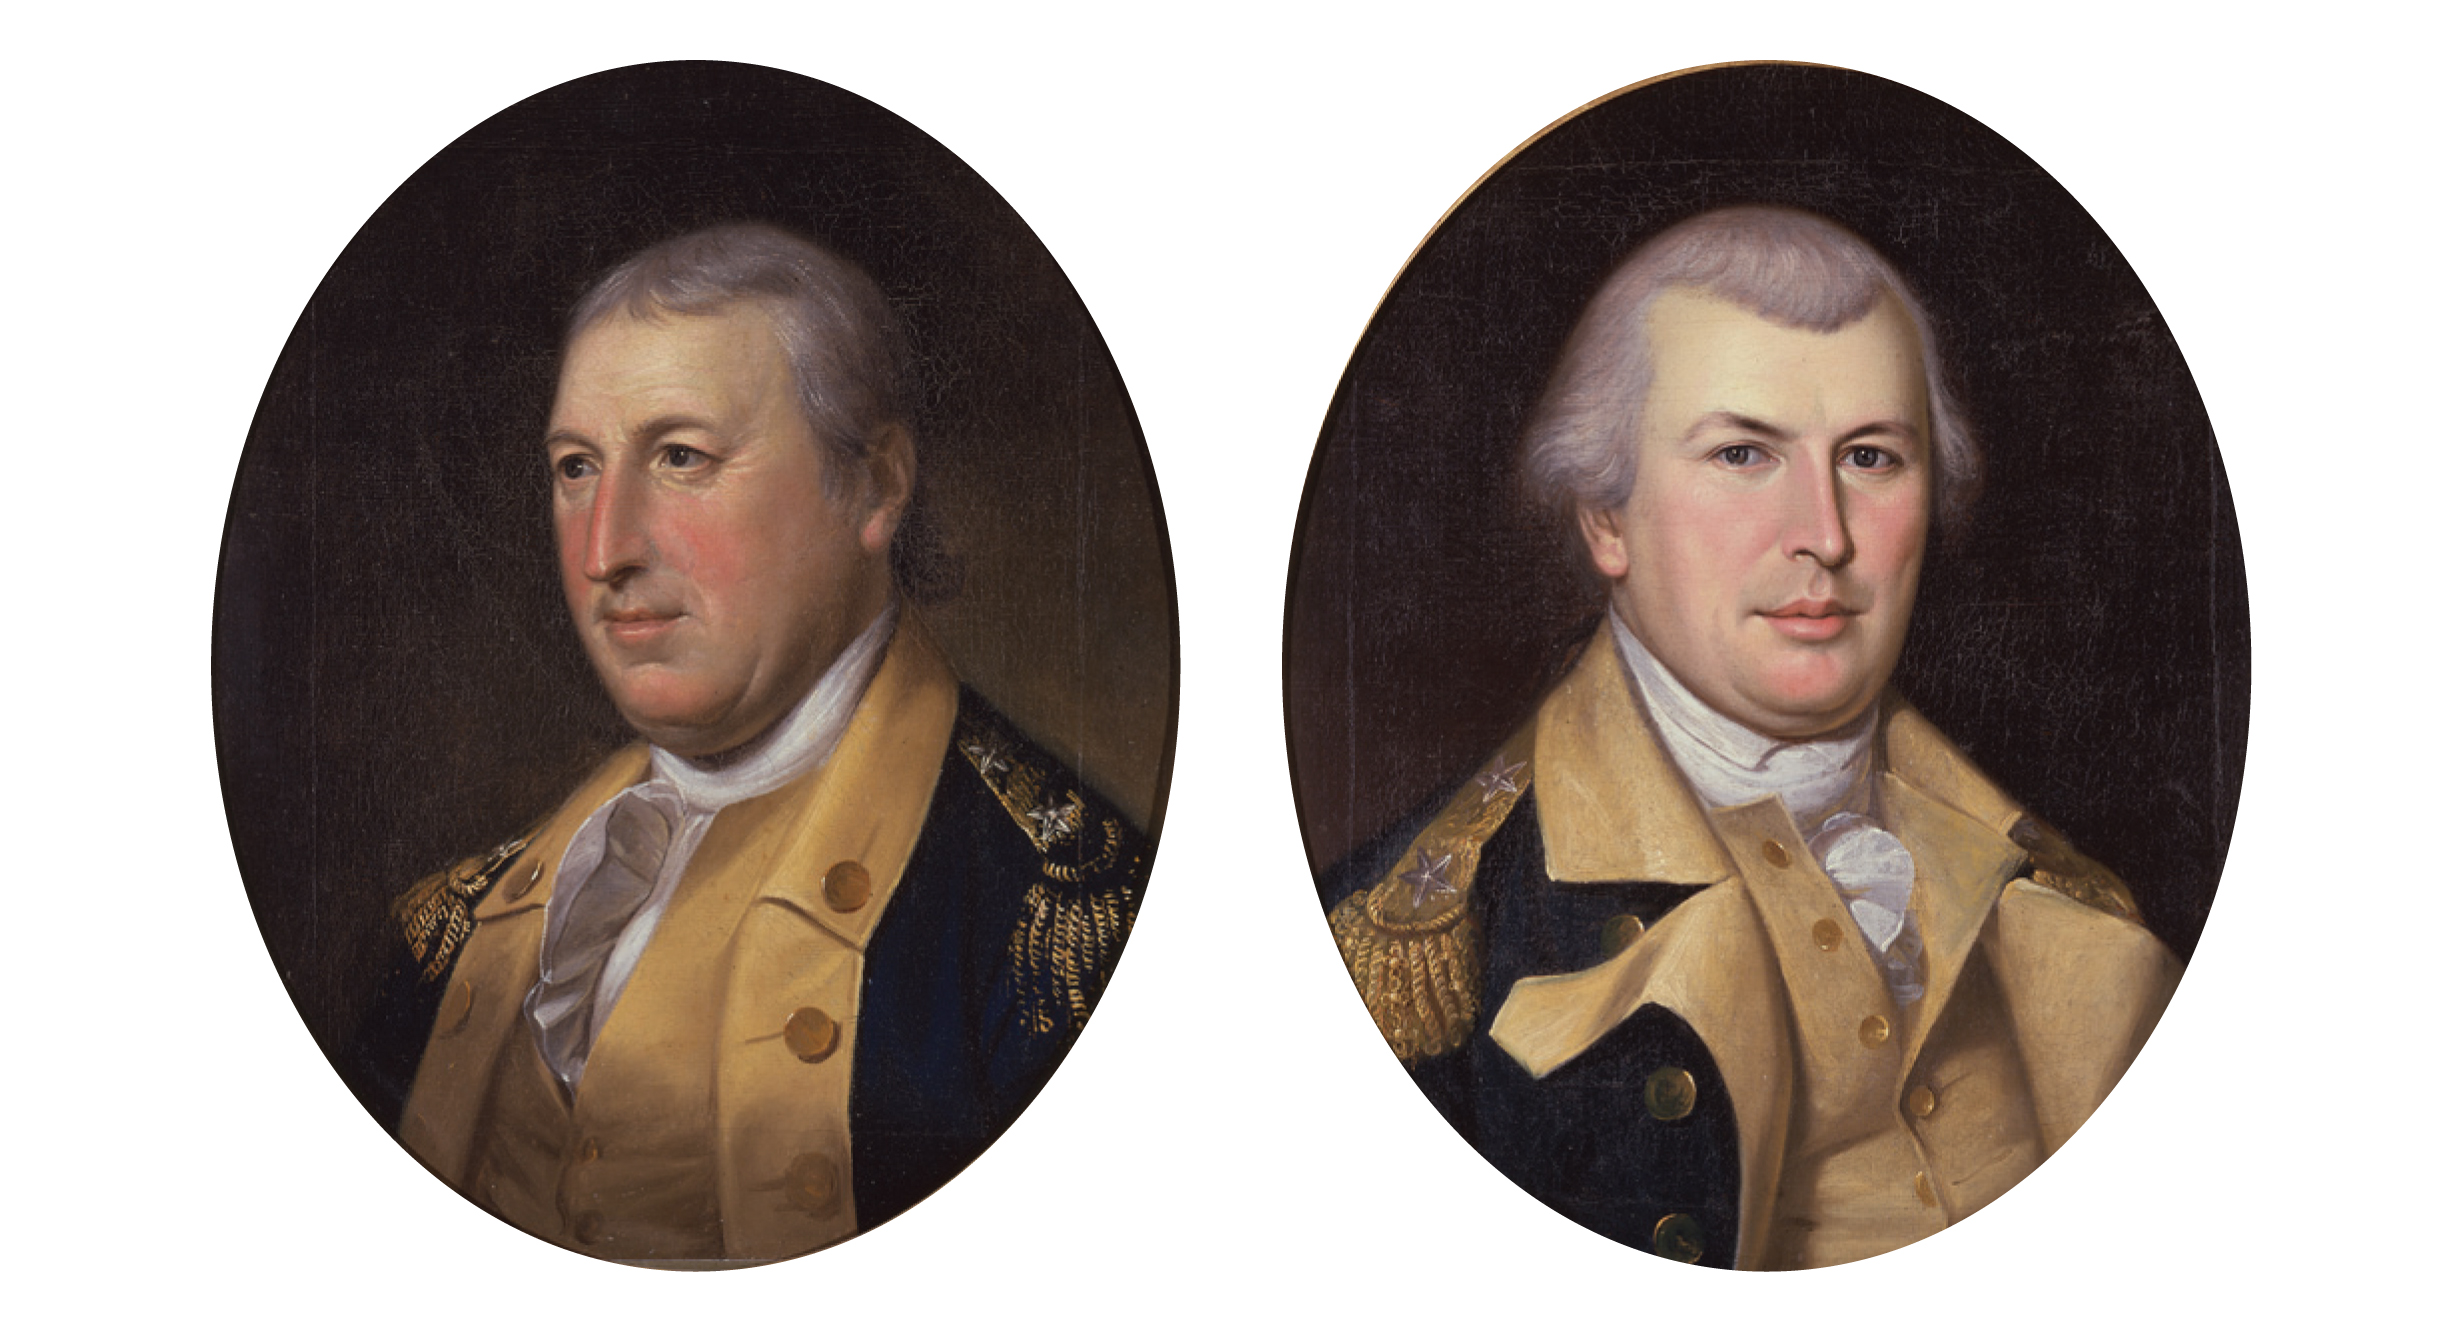 Above left: Gen. Horatio Gates commanded the Continental Army Southern Military Department in South Carolina until the great debacle of the Battle of Camden, which he fled. This 1782 portrait by Charles Willson Peale hangs in the National Portrait Gallery of the Smithsonian Institution. Above right: Born a Quaker in Rhode Island, Nathanael Greene was expelled from his church when he first showed support for armed rebellion against England. Washington sent him to succeed Gates as the commanding general of the Continental Army in South Carolina, which he did very successfully. This 1783 portrait by Charles Willson Peale is courtesy of Independence National Historical Park. 